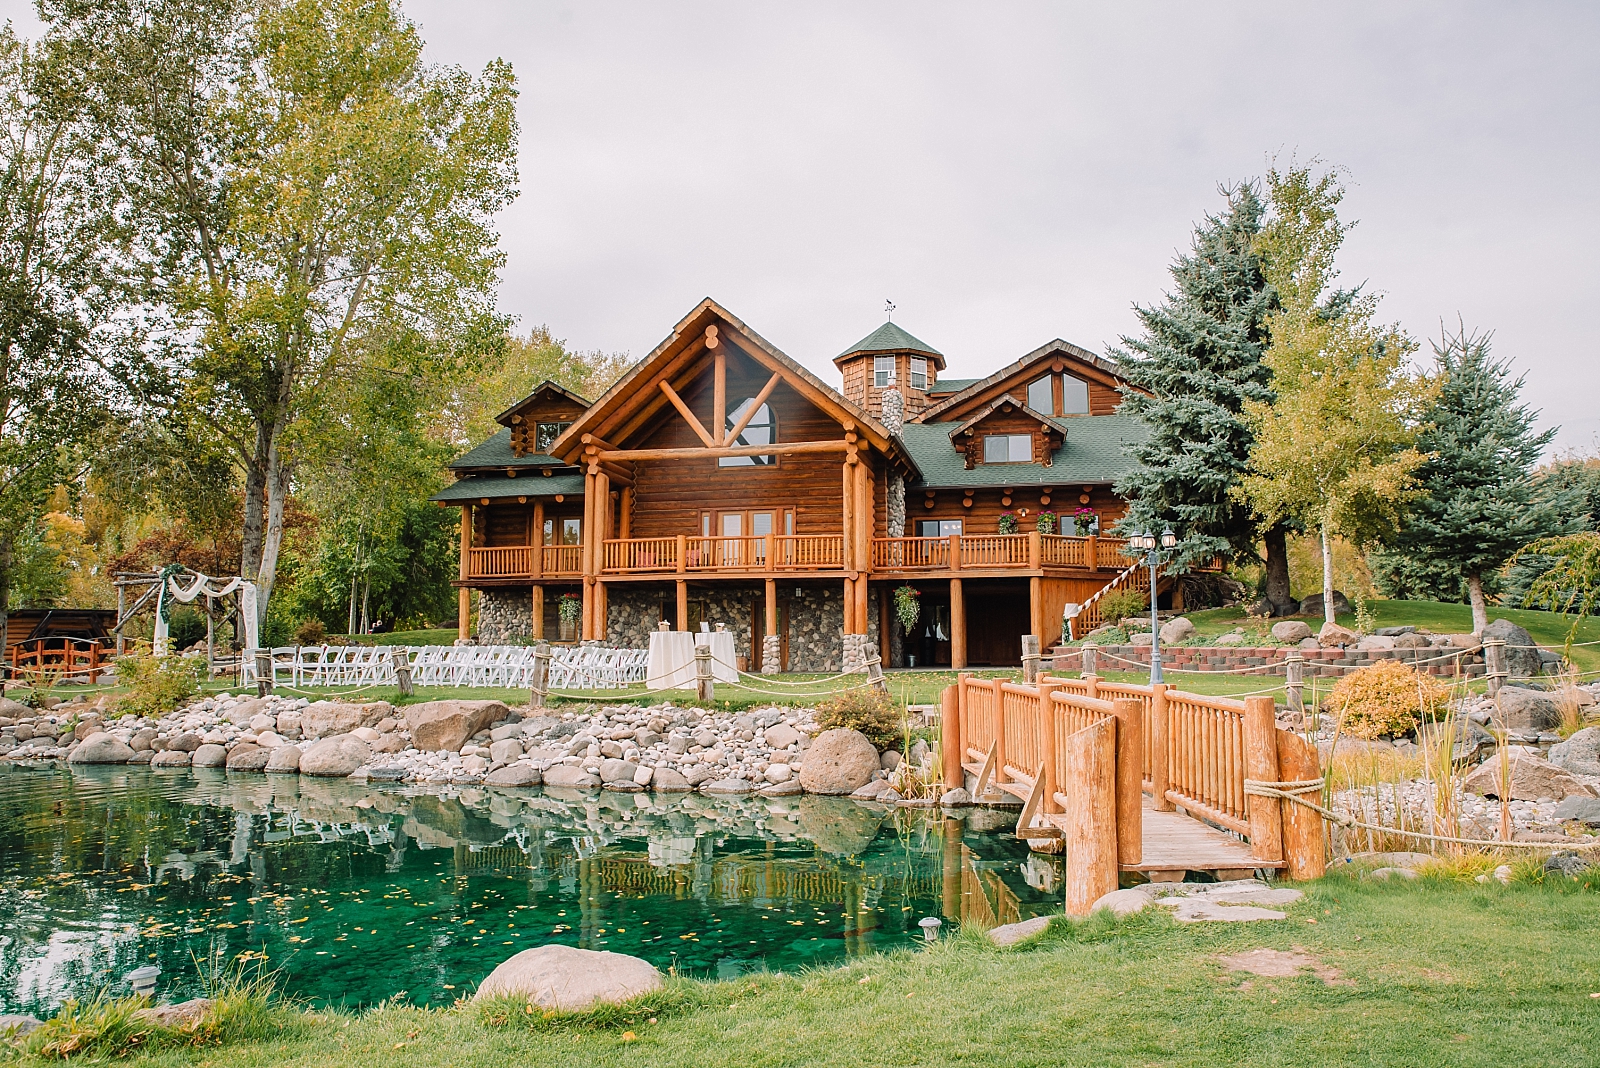 LaBelle Lake Wedding Venue Cabin and spacious property